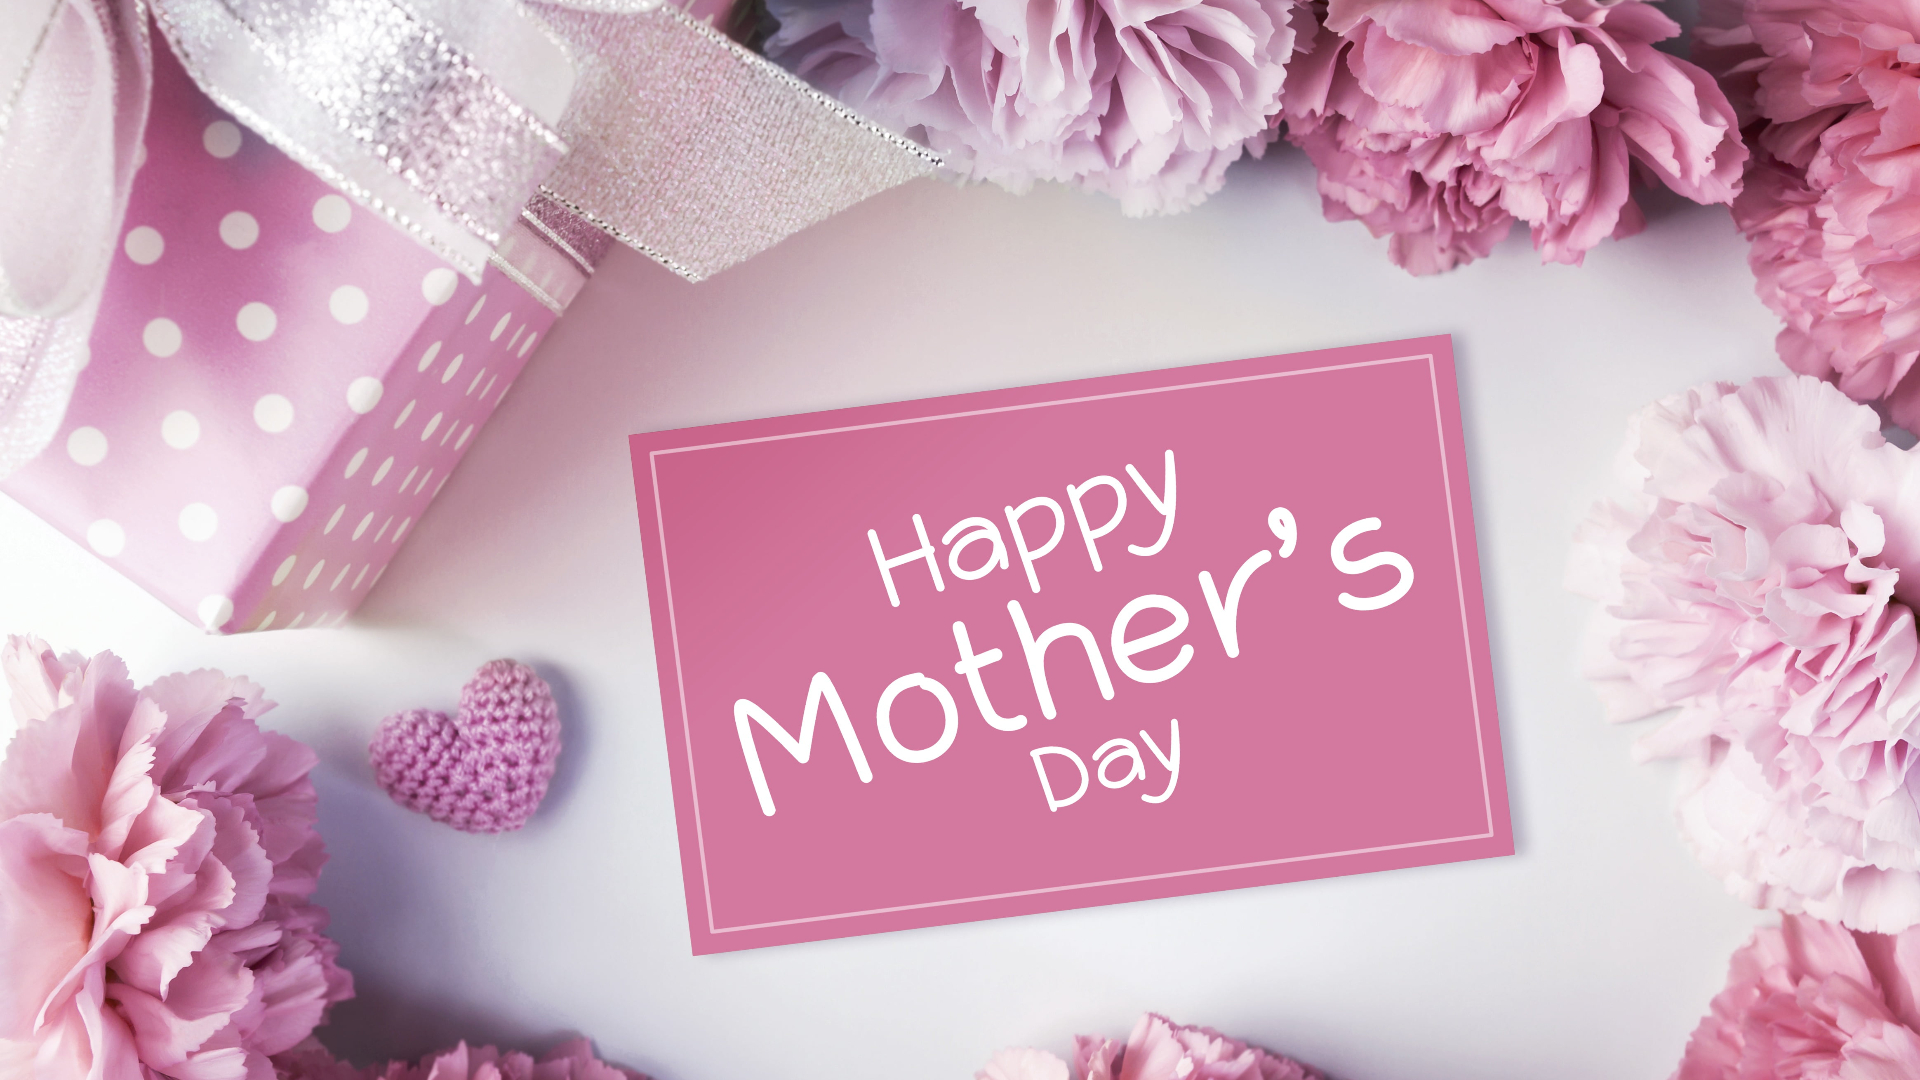 happy mother's day images